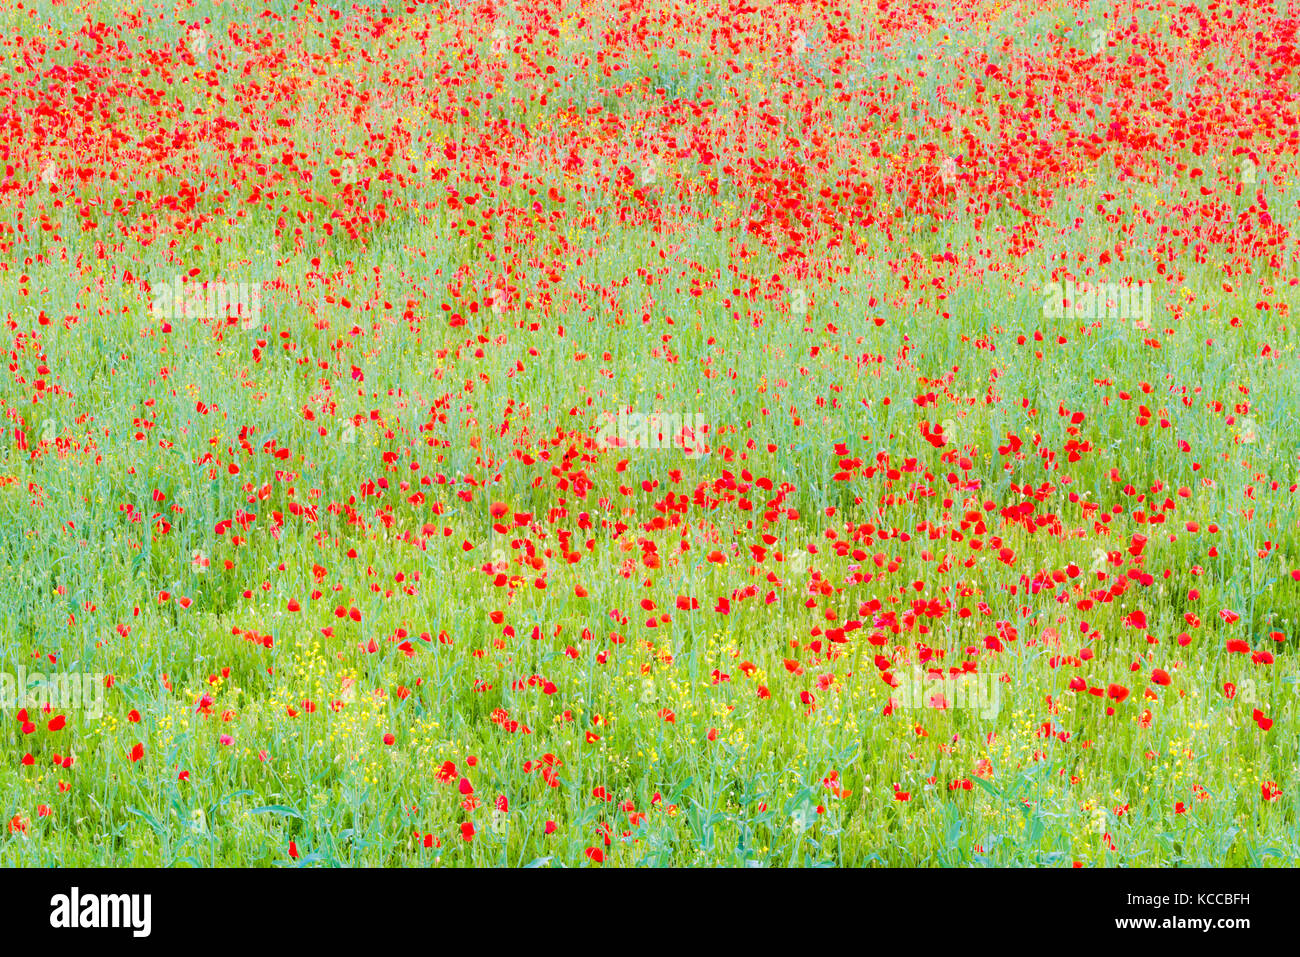 Colorful poppies field Stock Photo